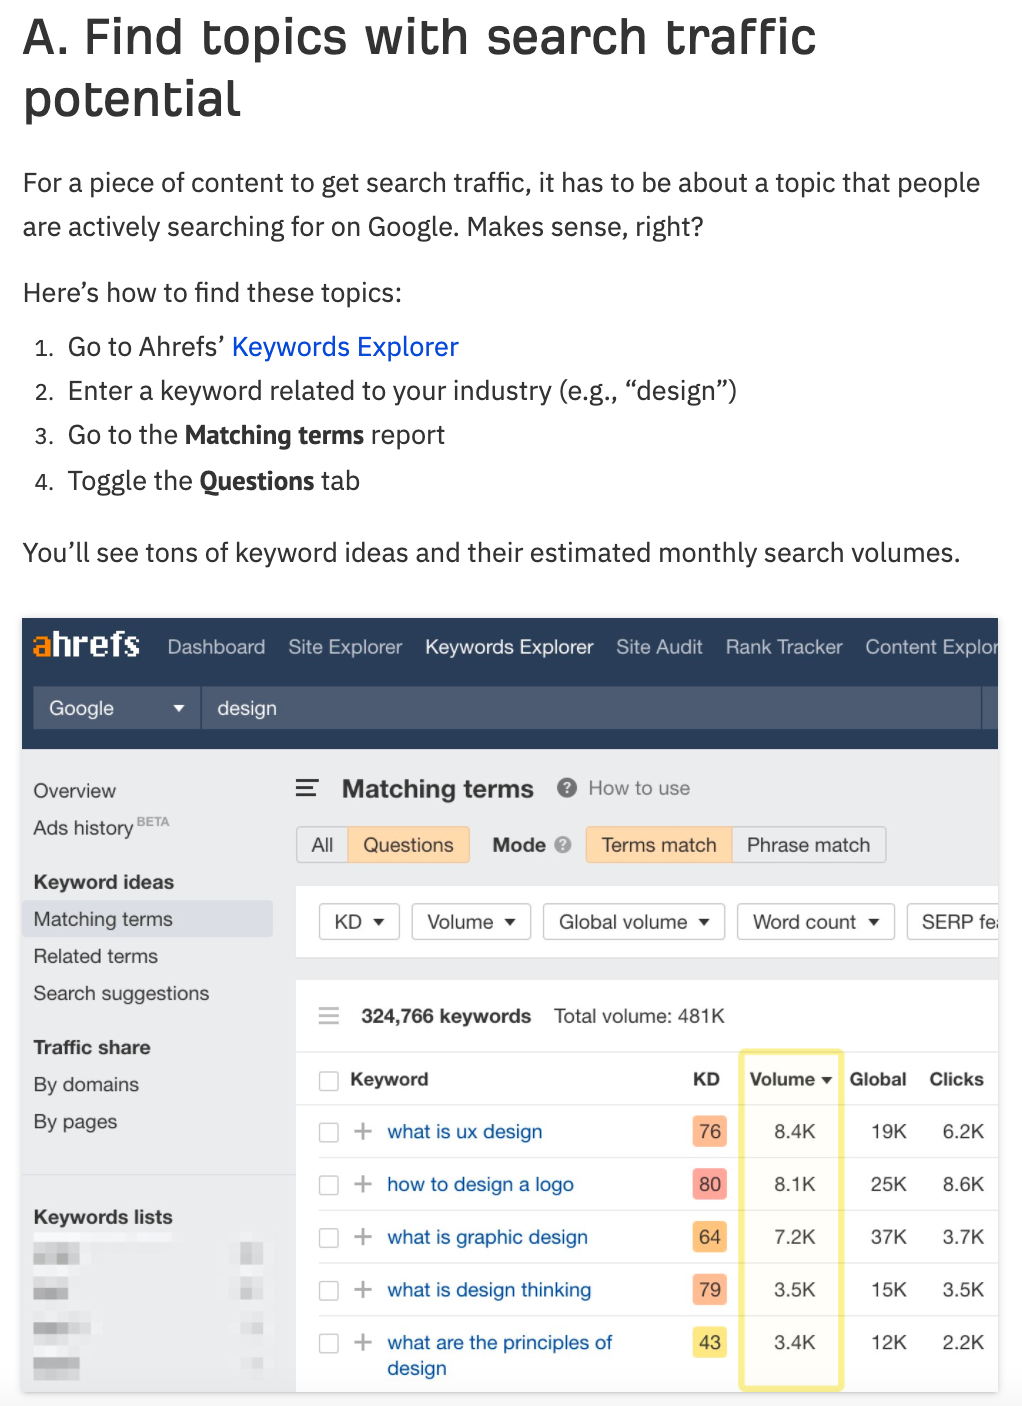 Ahrefs product-led content